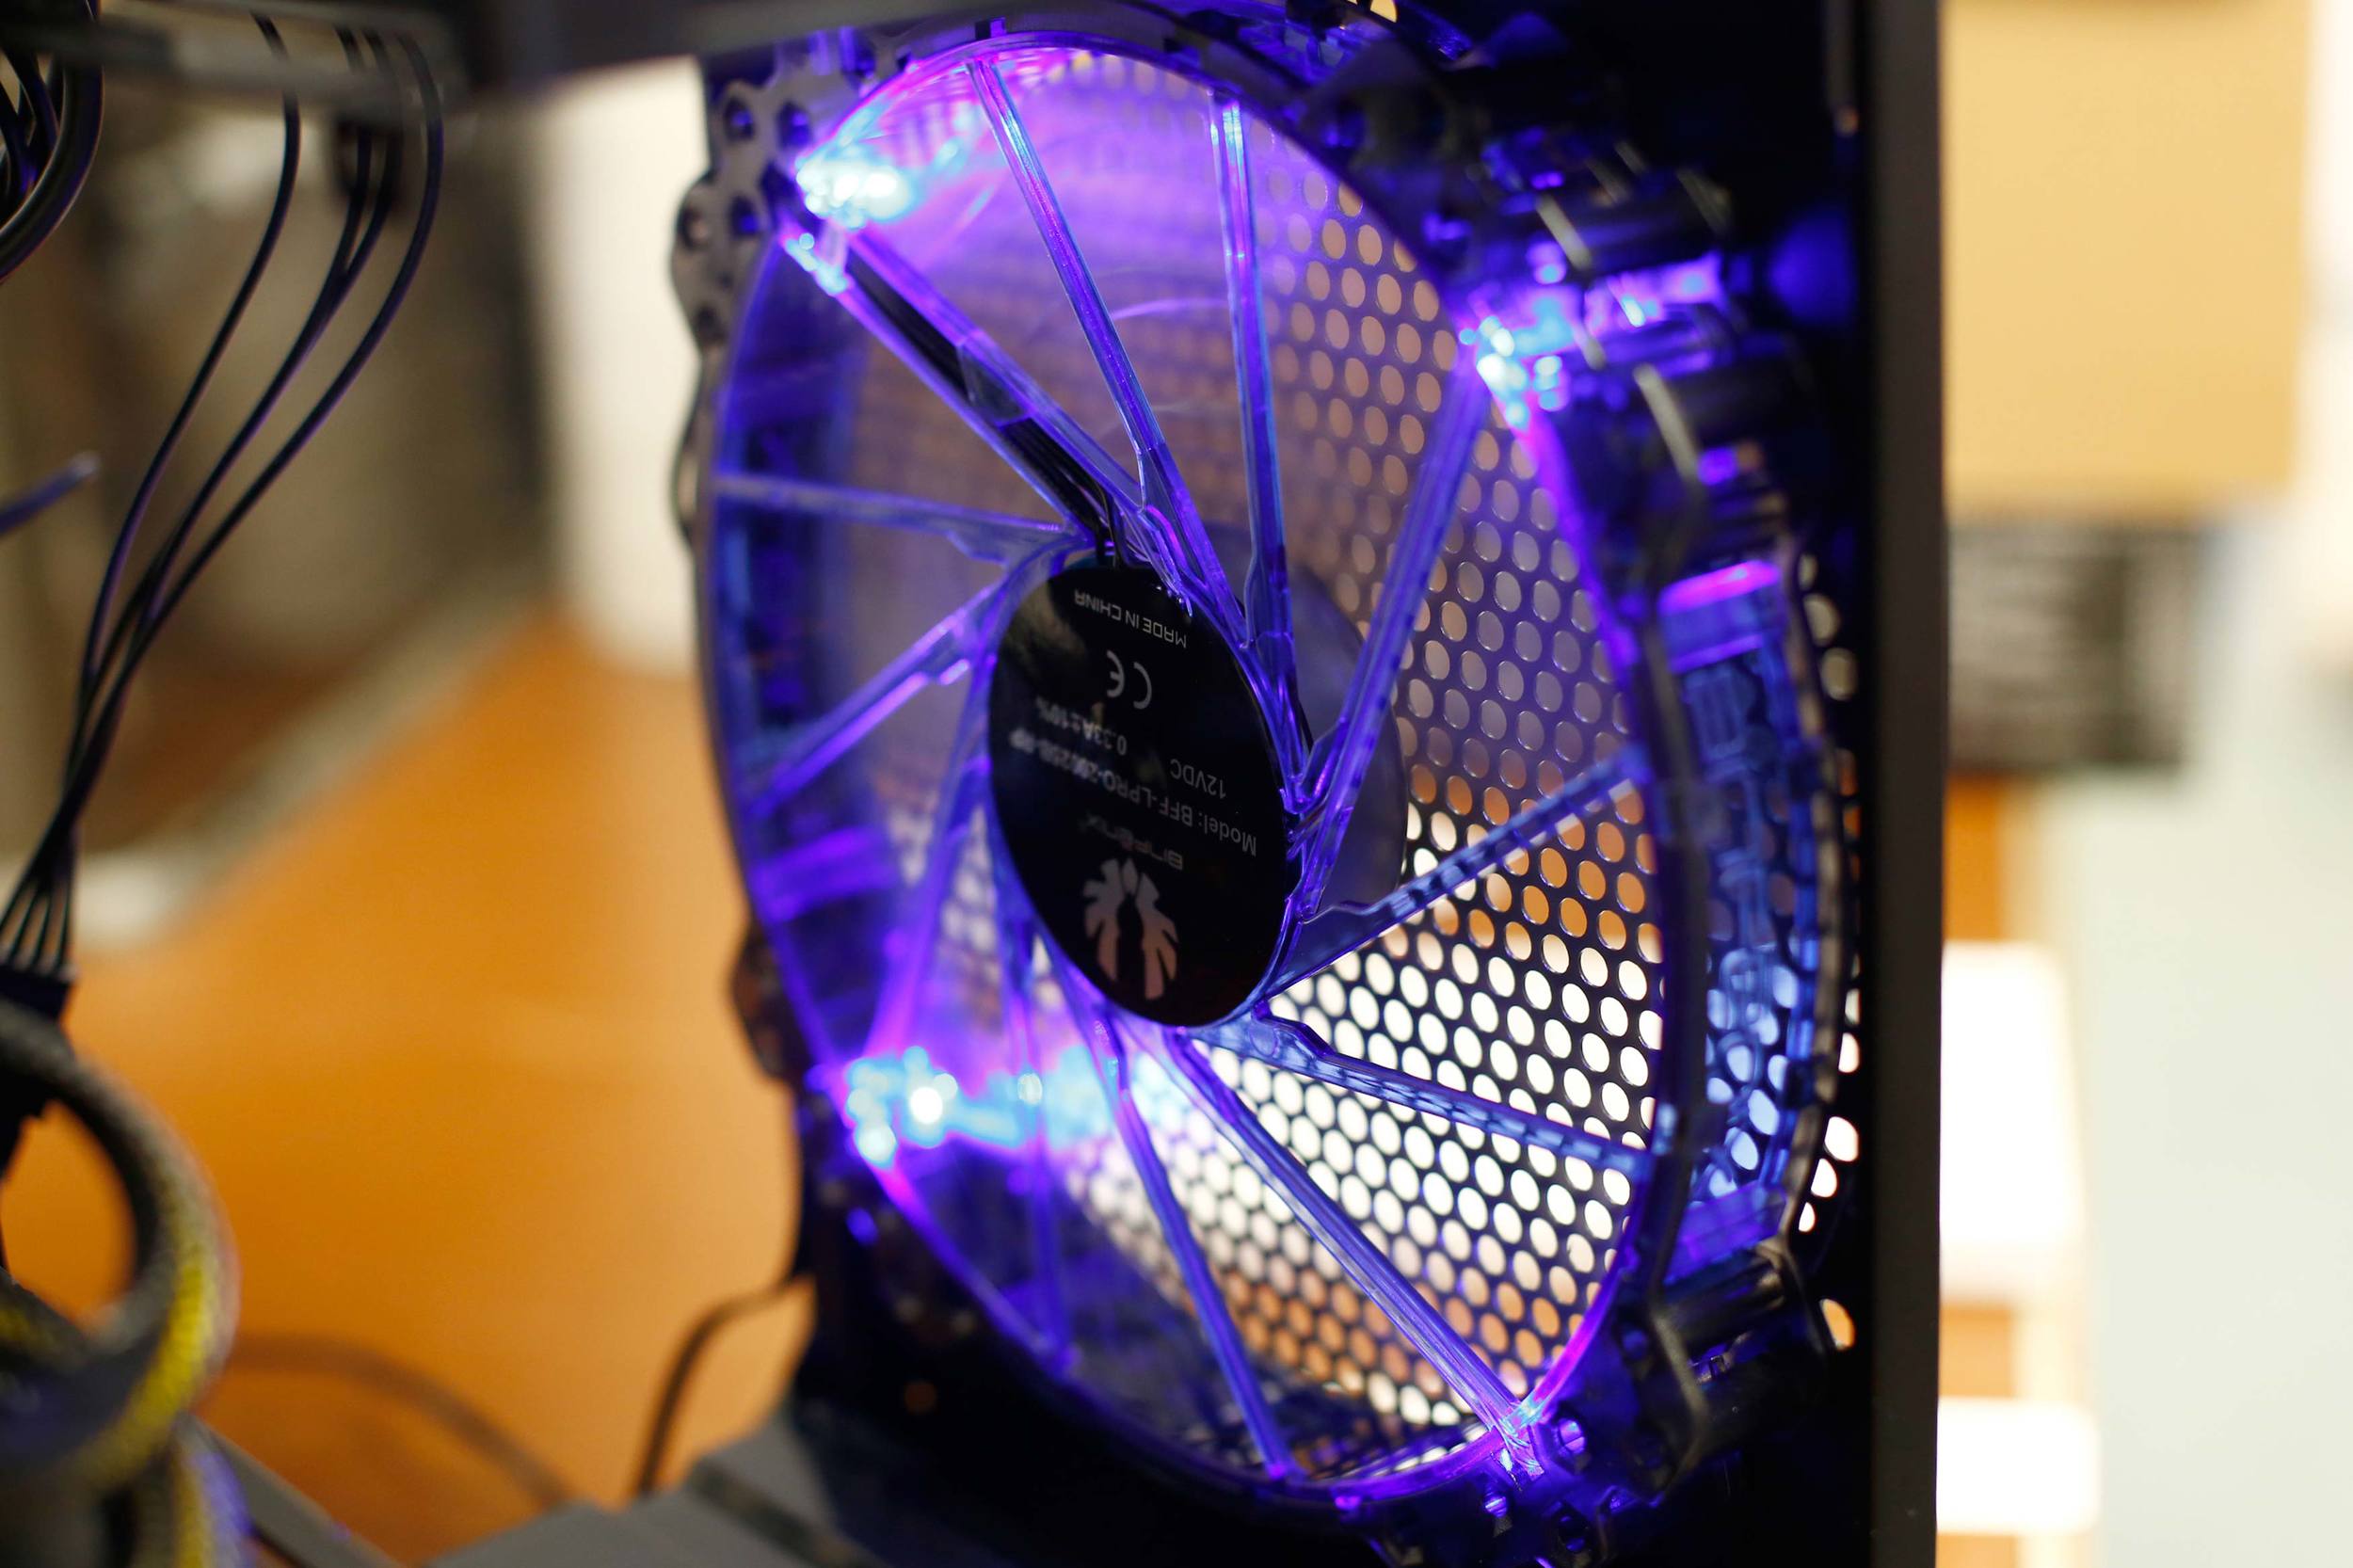 One of the large BitFenix Spectre Pro fans I installed on my computer. And yes, I turned off the blue LED lights.